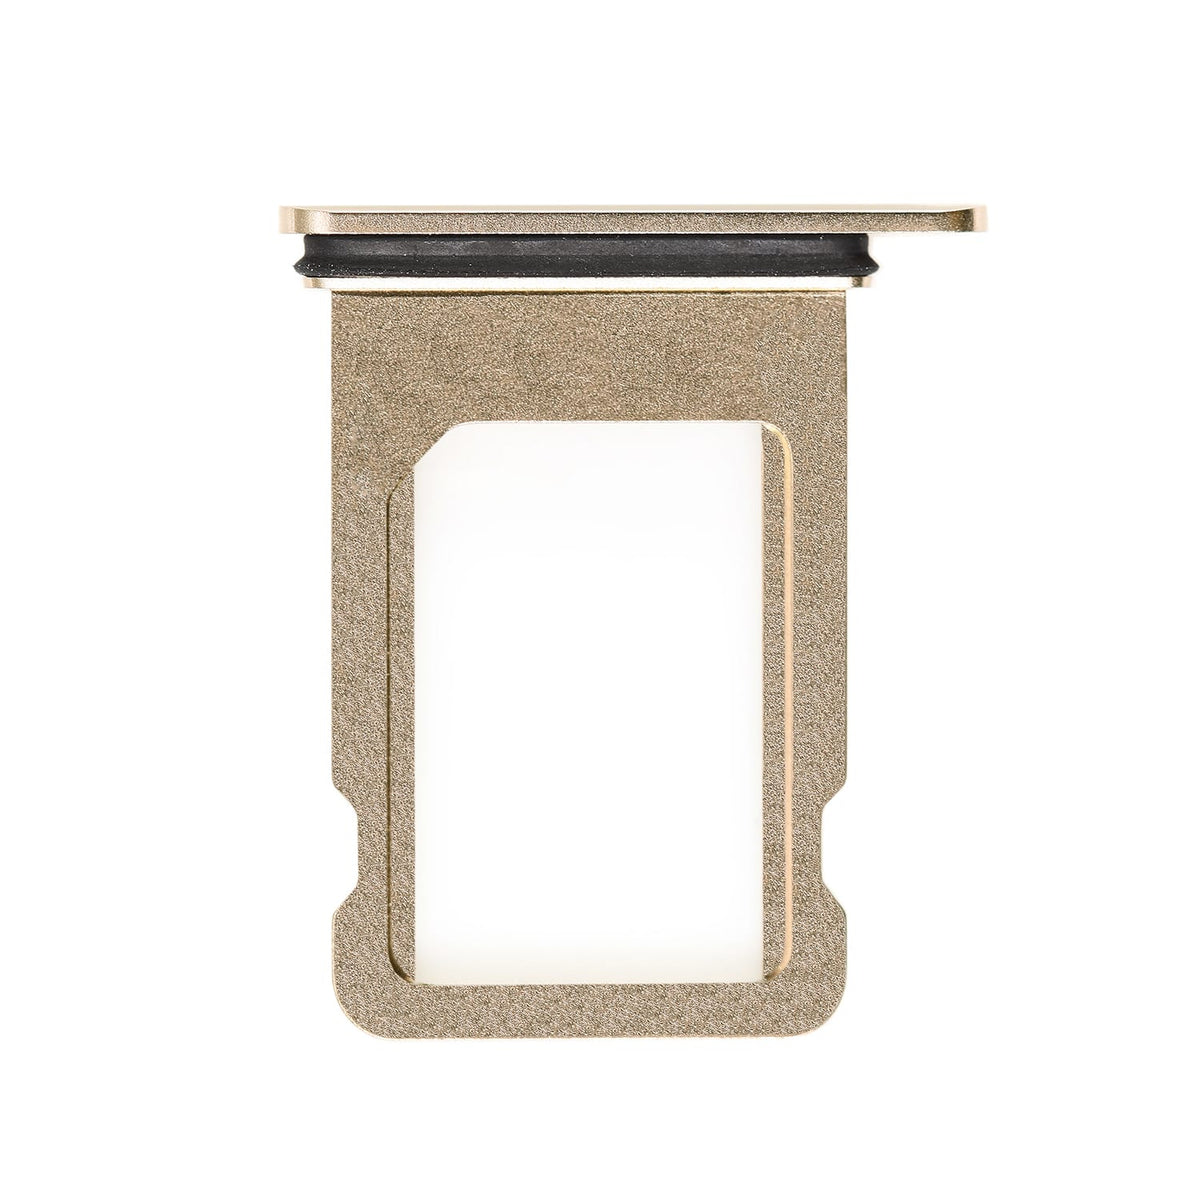 SIM CARD TRAY - GOLD FOR IPHONE XS